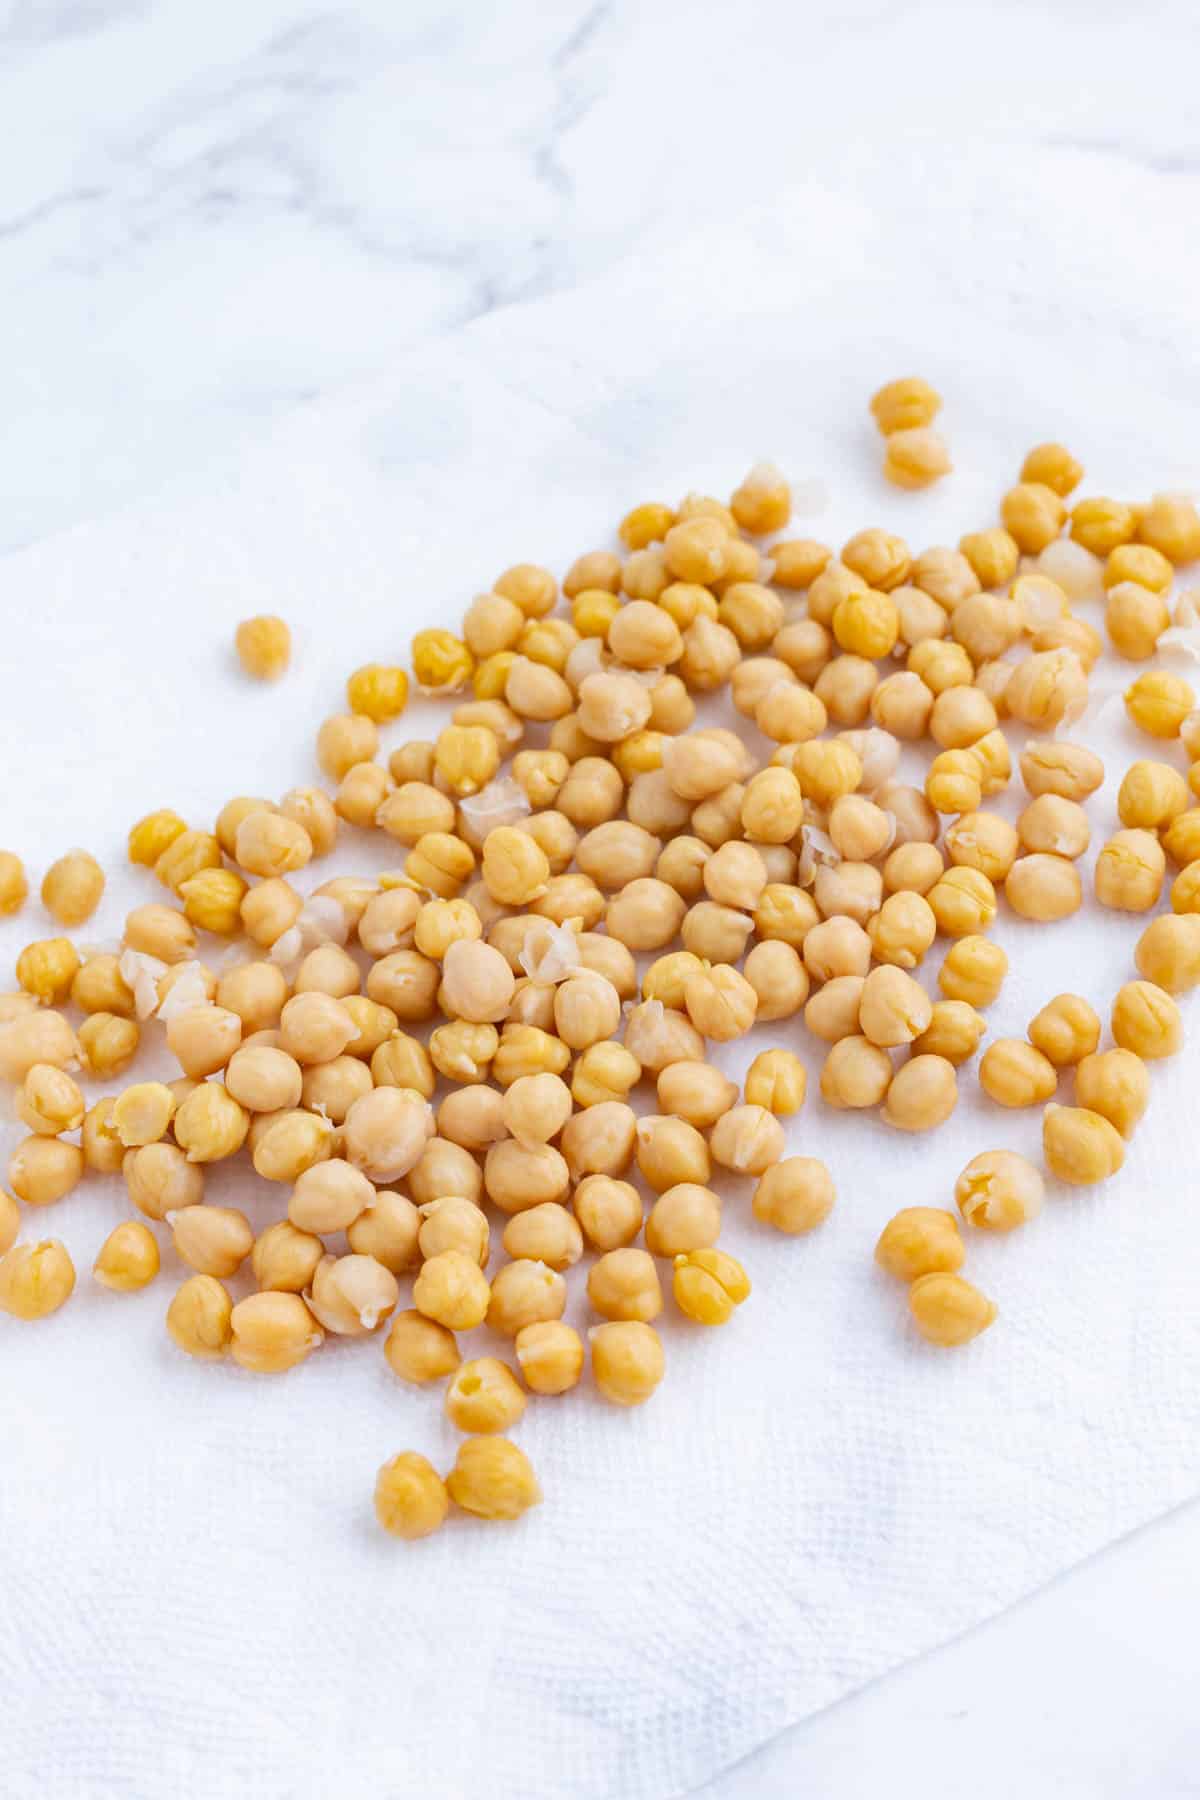 Chickpeas are dried on a paper towel.